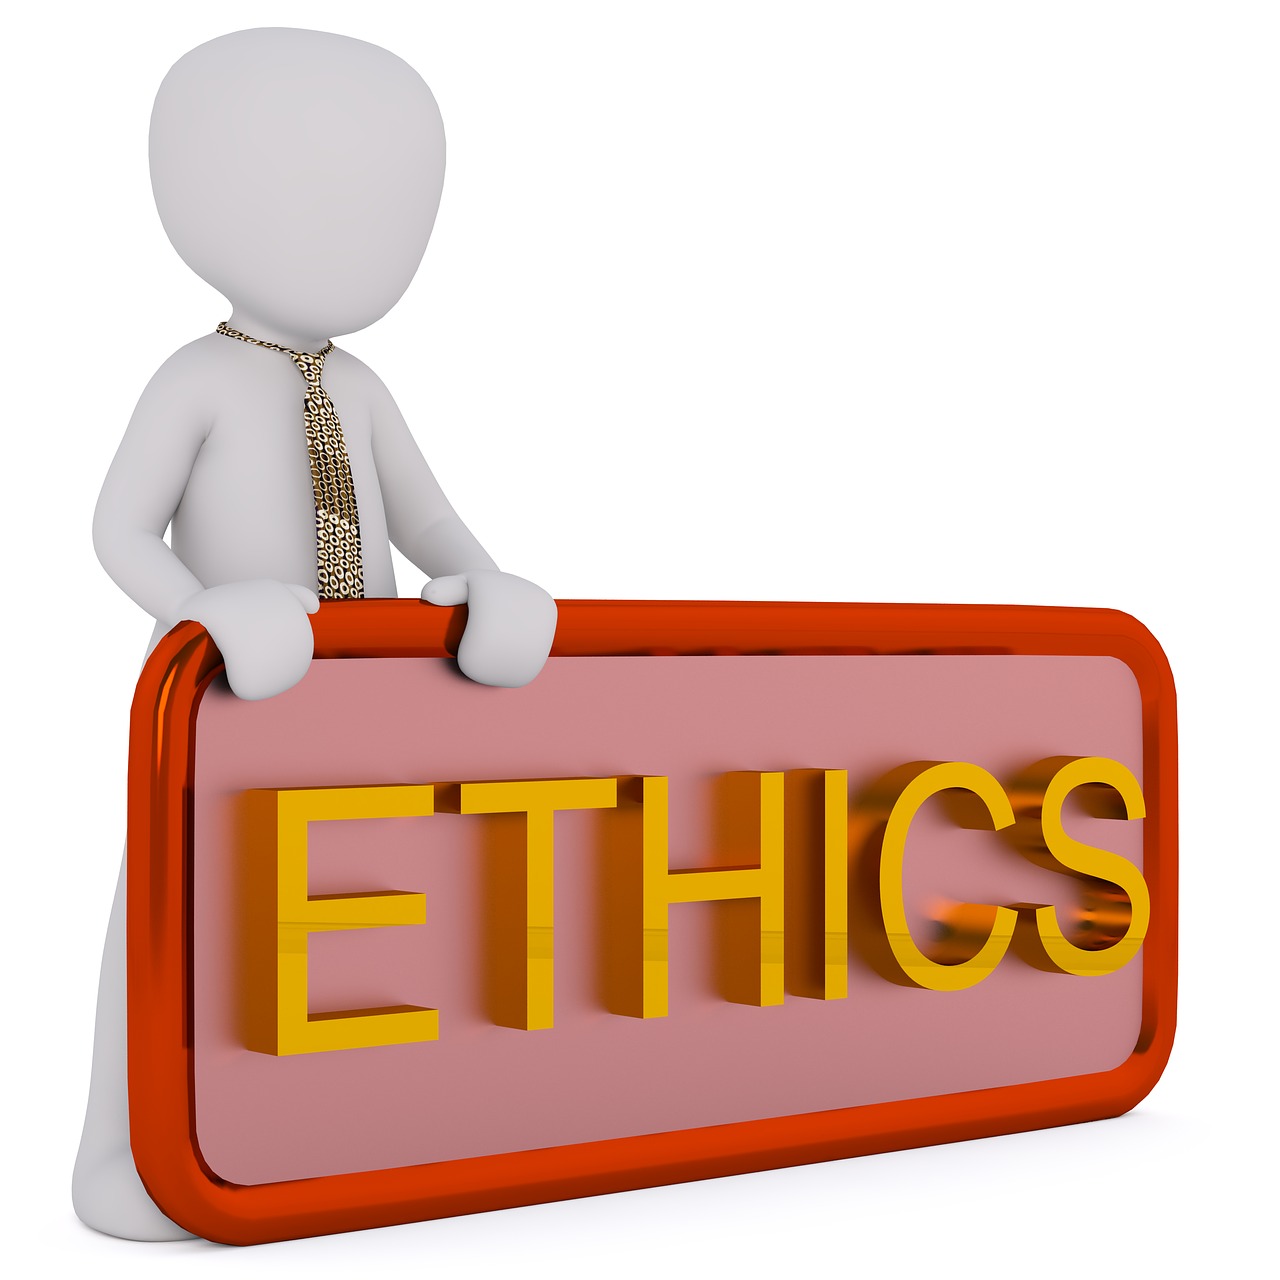 Car Accident Are Lawyers Ethical?